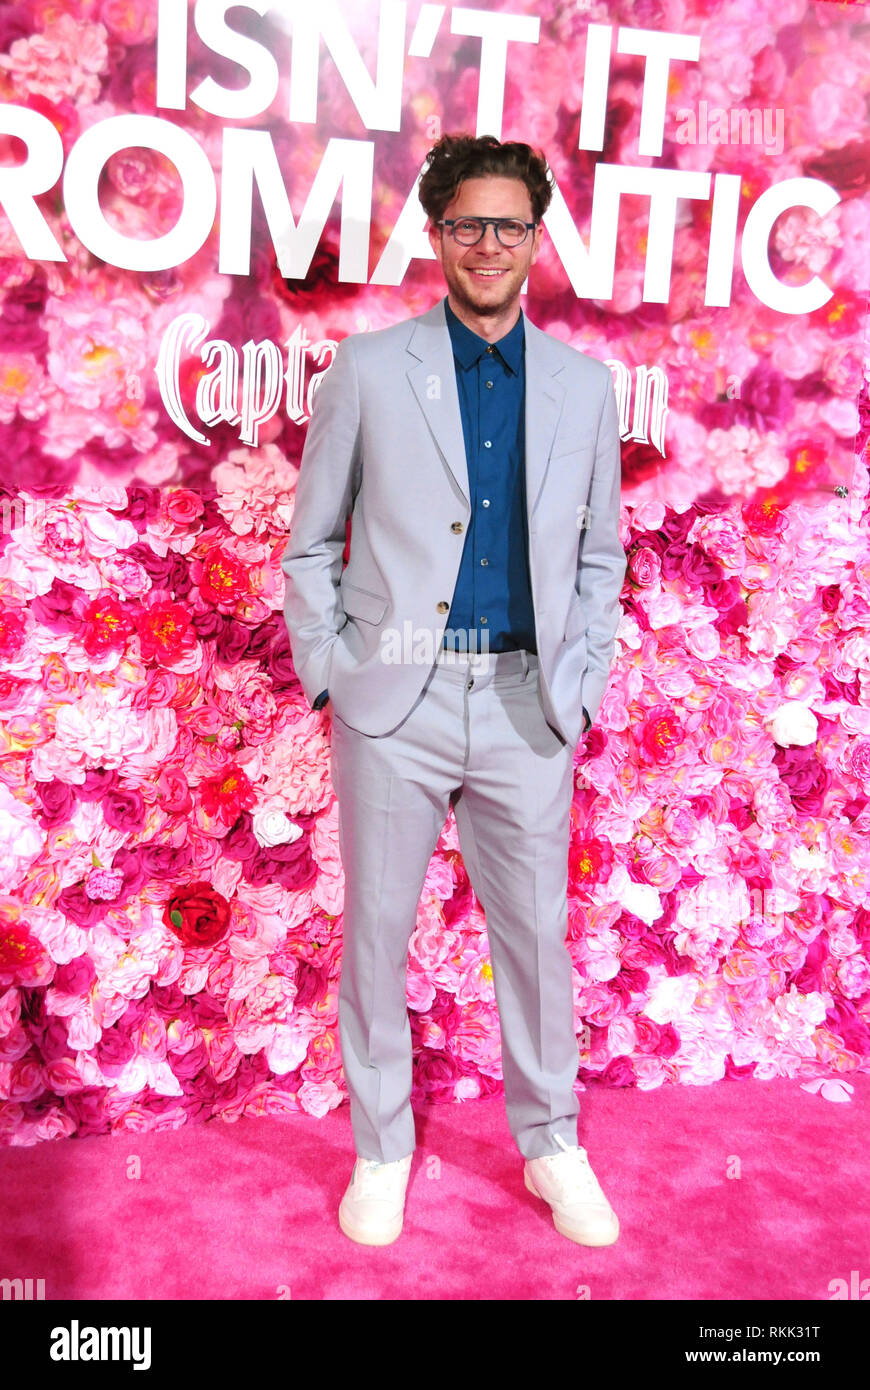 Los Angeles, USA. 11th Feb, 2019. LOS ANGELES, CA - FEBRUARY 11: Director Todd Strauss-Schulson attends Warner Bros. Pictures' 'Isn't It Romantic' Premiere on February 11, 2019 at The Theatre at Ace Hotel in Los Angeles, California. Photo by Barry King/Alamy Live News Stock Photo